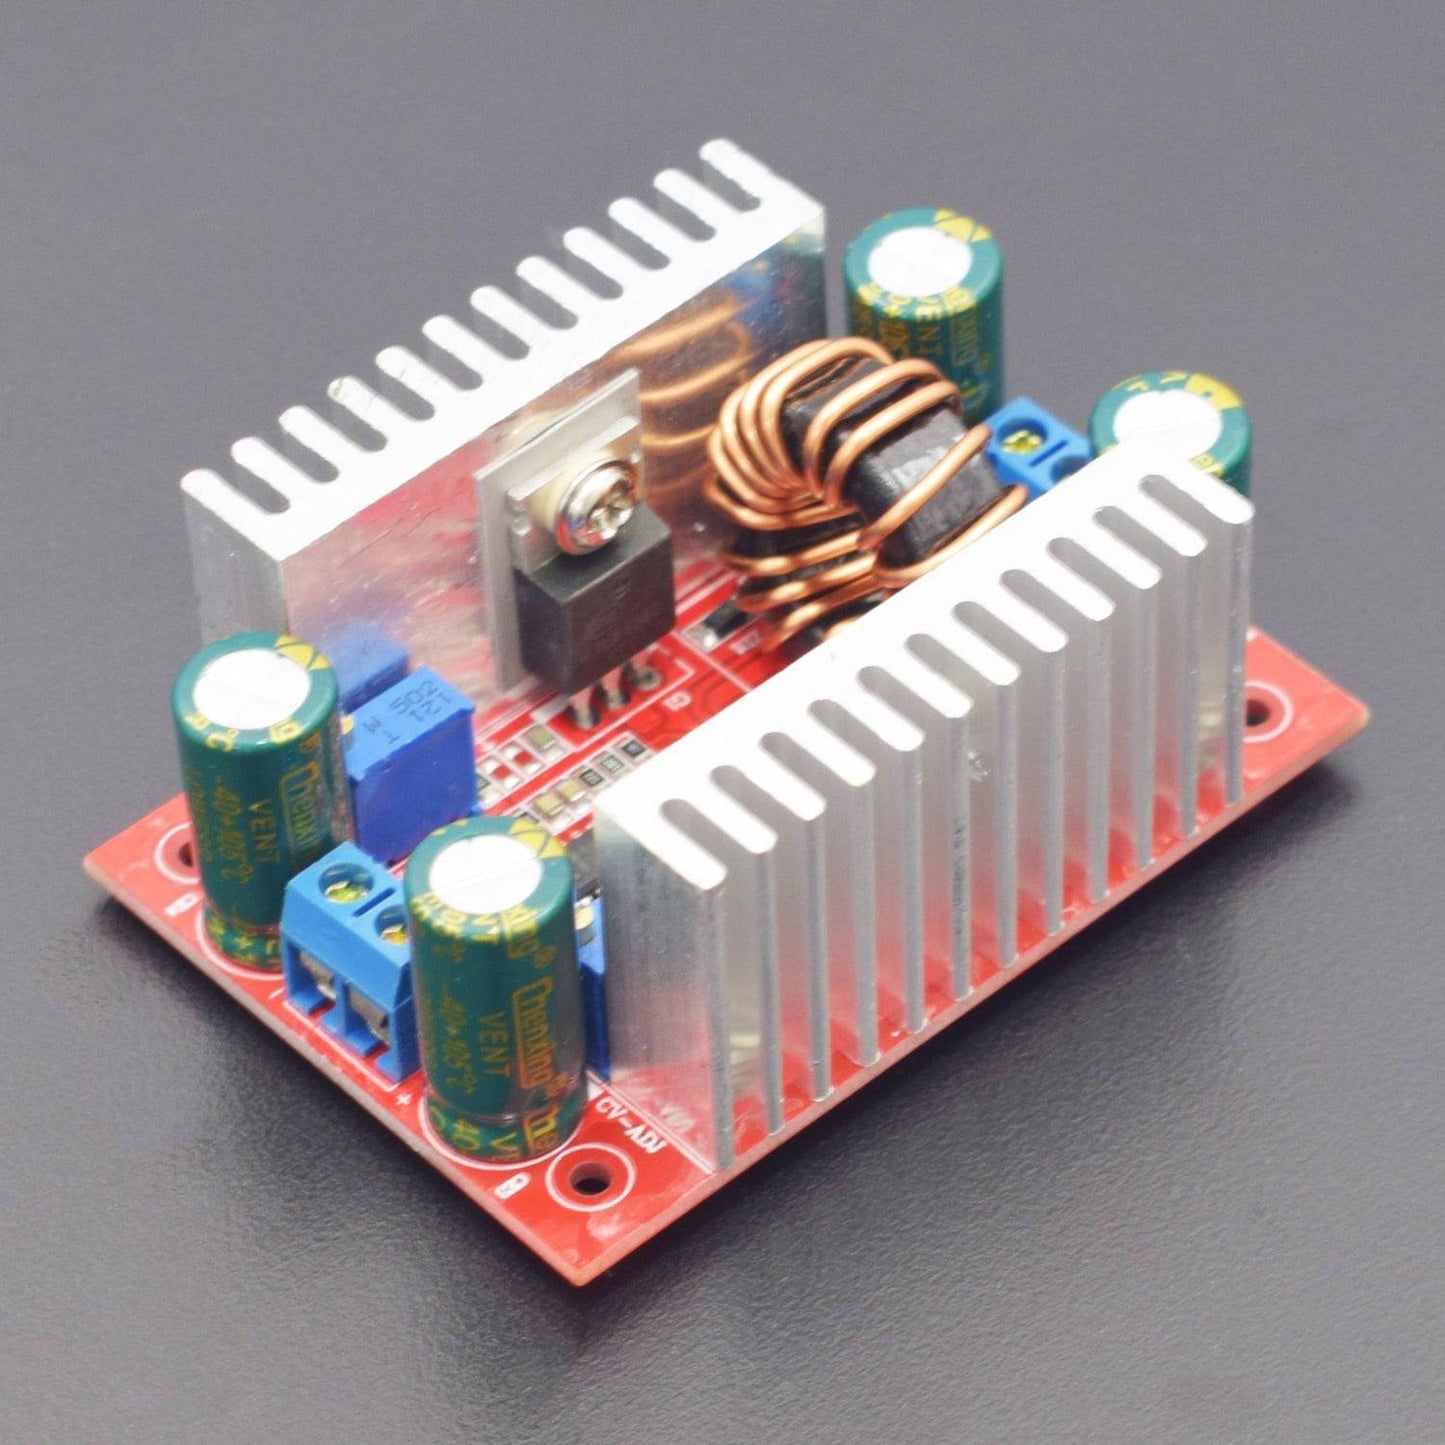 Boost Module 400W DC-DC Step-up Boost Converter Constant Current Power Supply Module 15A Step-Up LED Driver - RS1837 - REES52